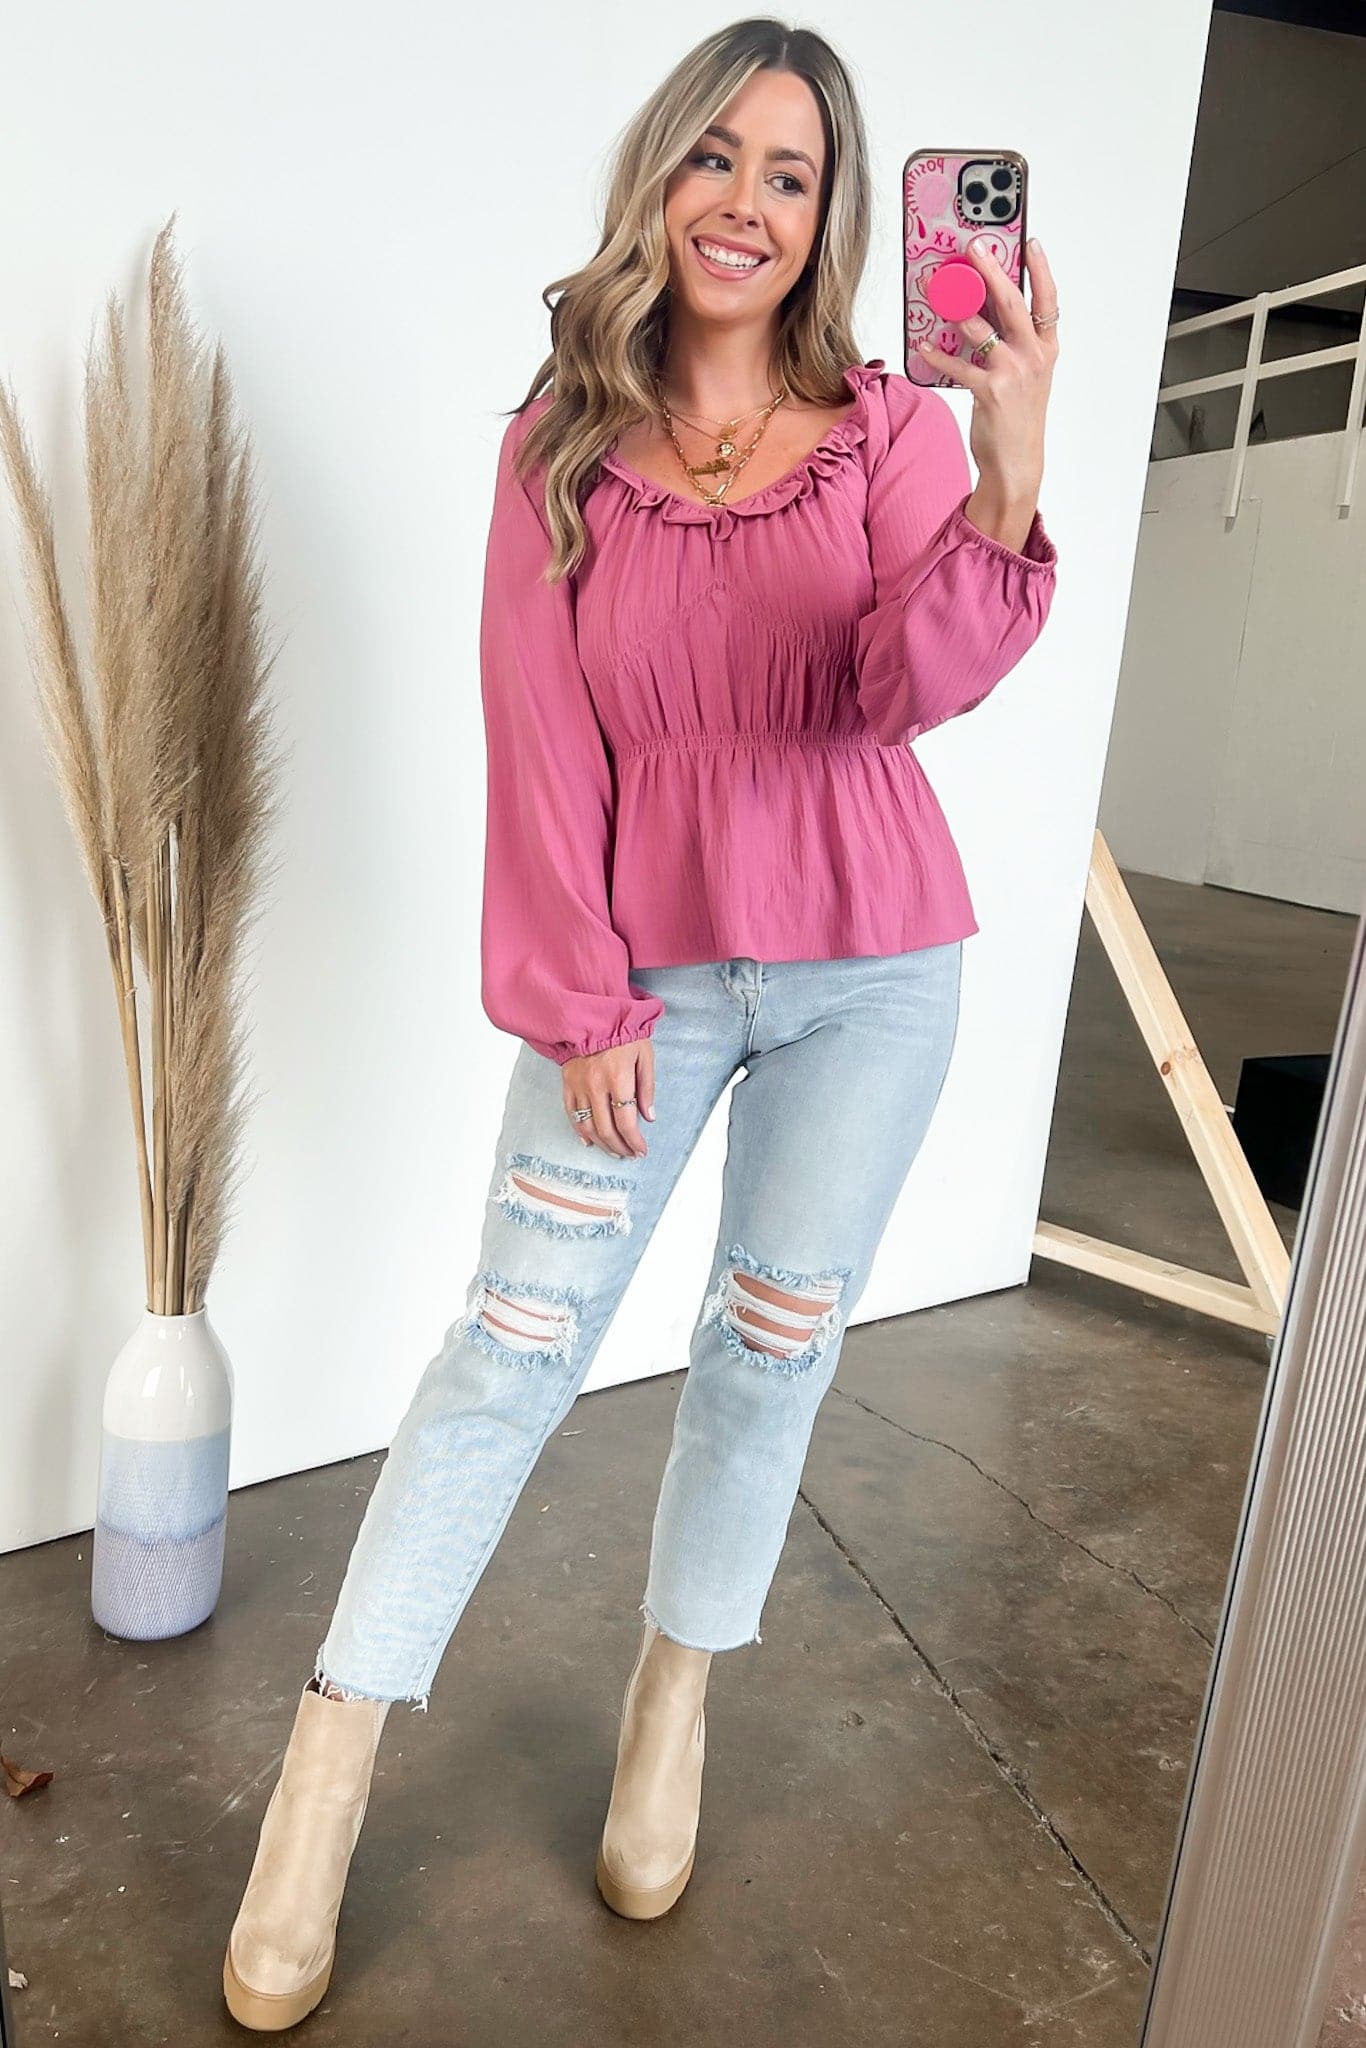  Flirtatious Ways Ruched Ruffle Top - FINAL SALE - Madison and Mallory